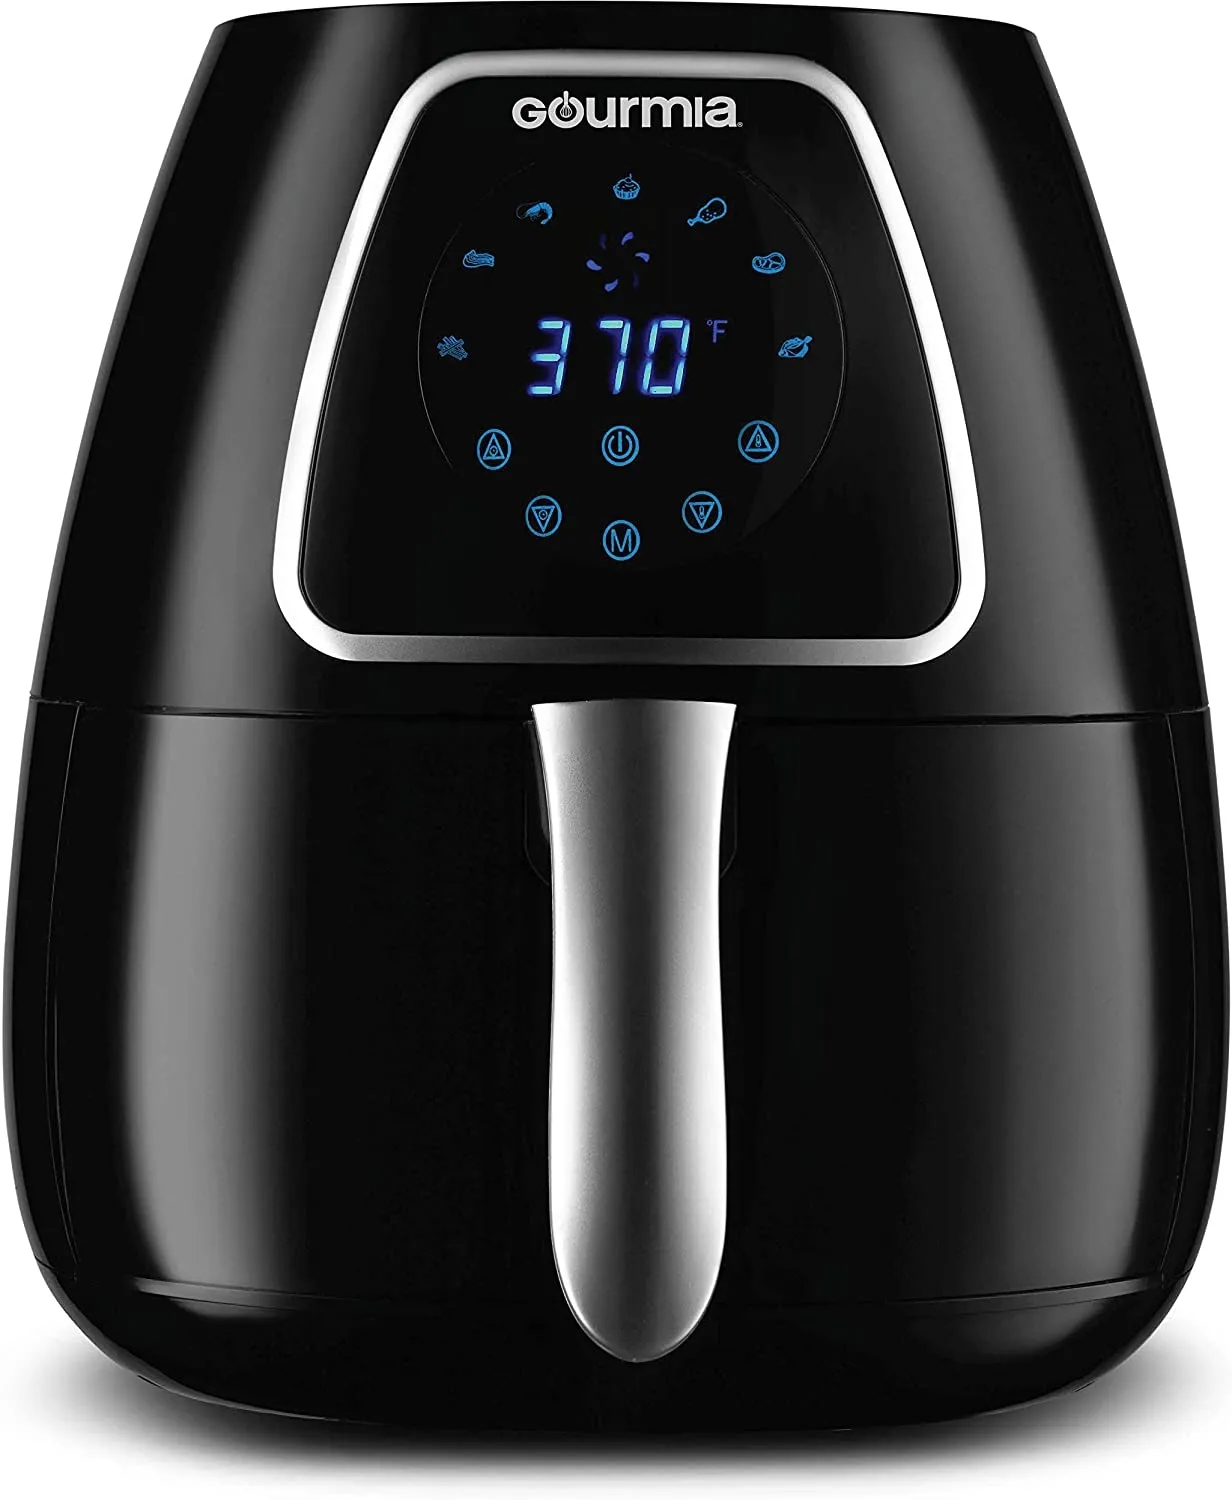 Advance Technology to Fix Your Power Air Fryer xl Reset Button within 2 minutes